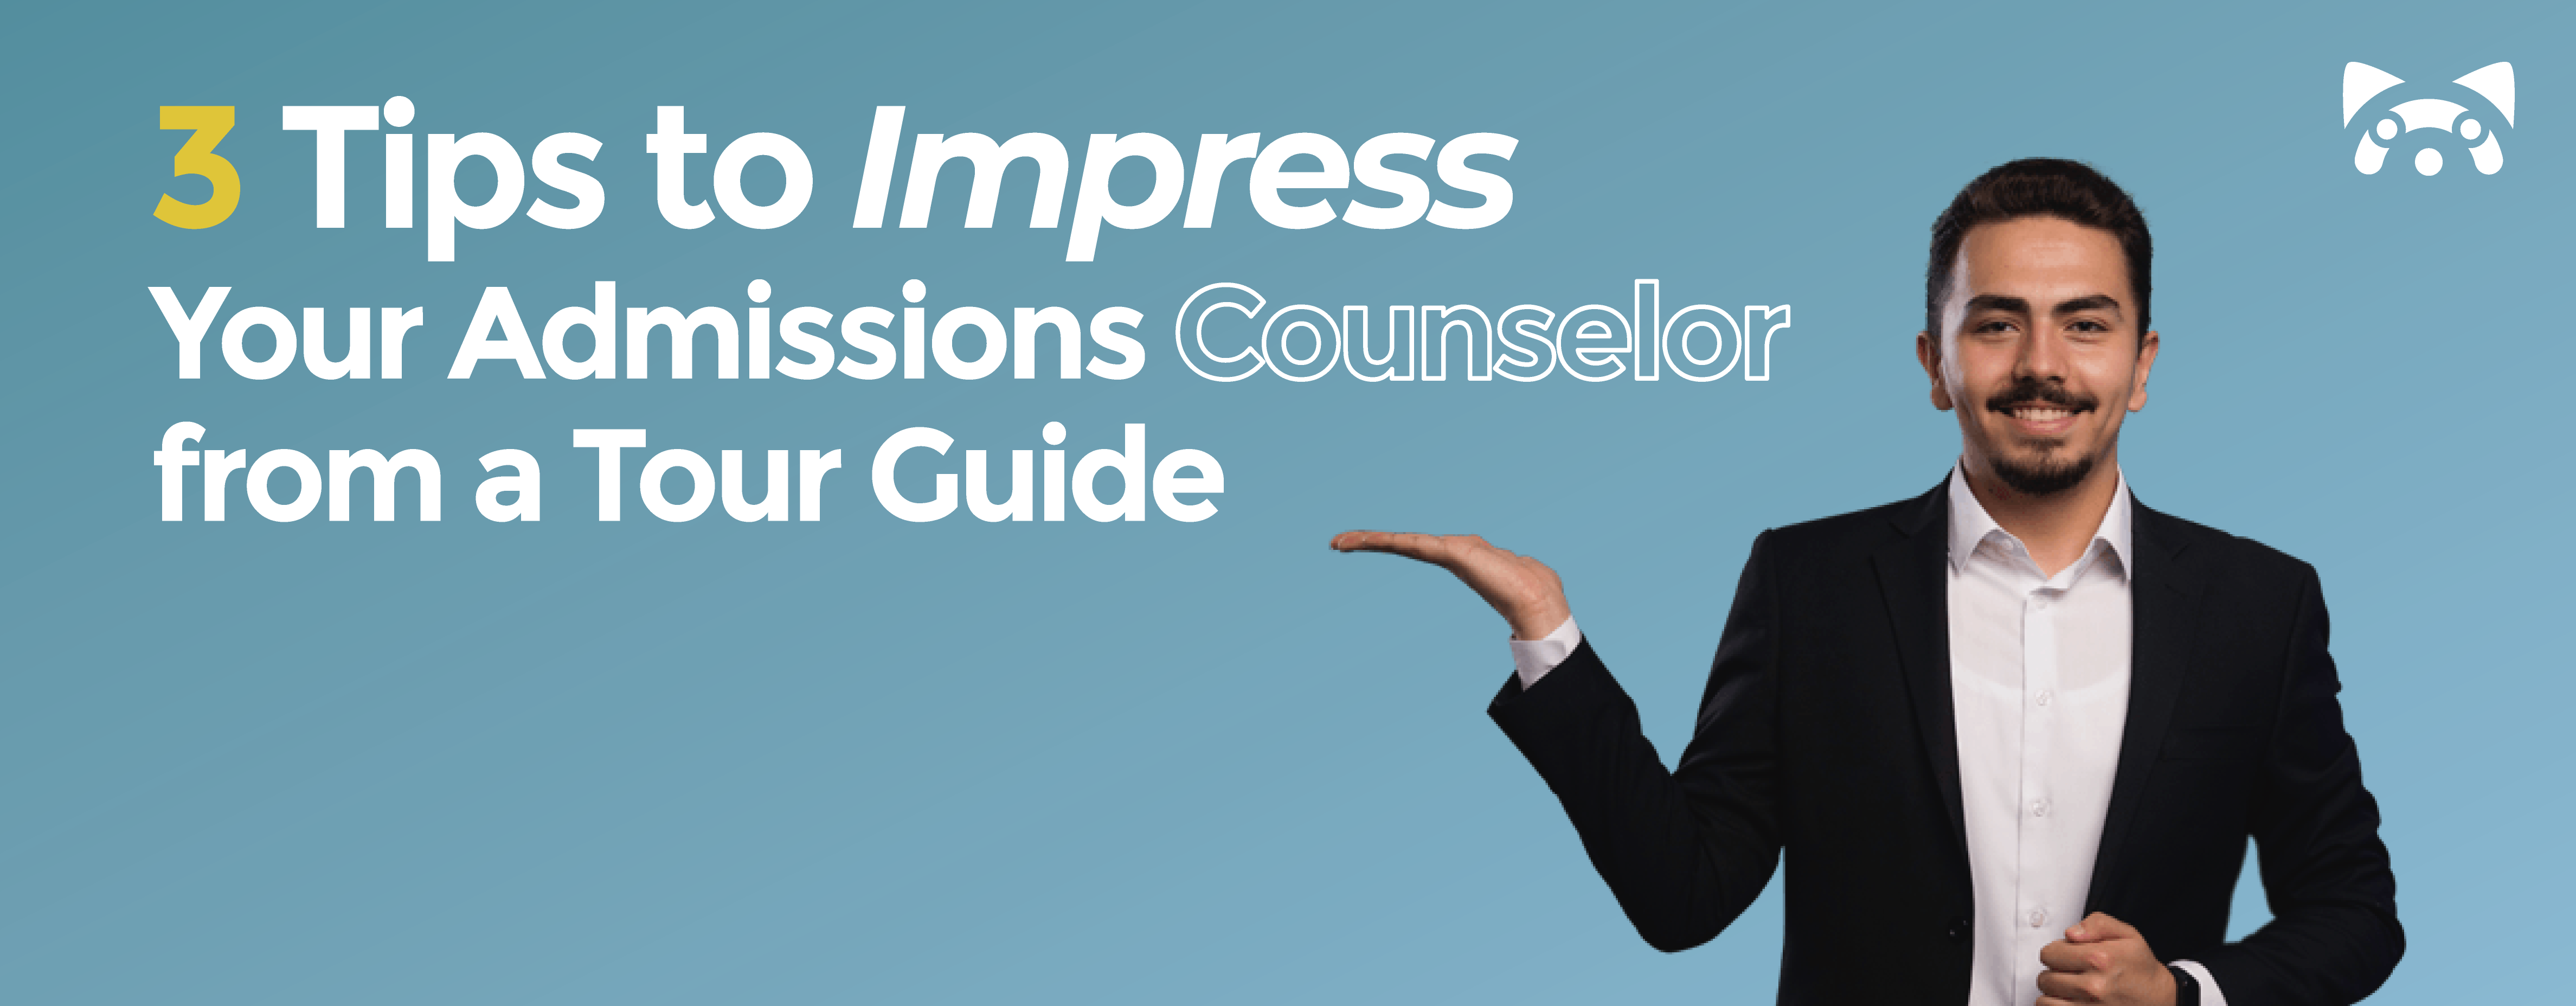 3 Tips to Impress Your Admissions Counselor from a Tour Guide